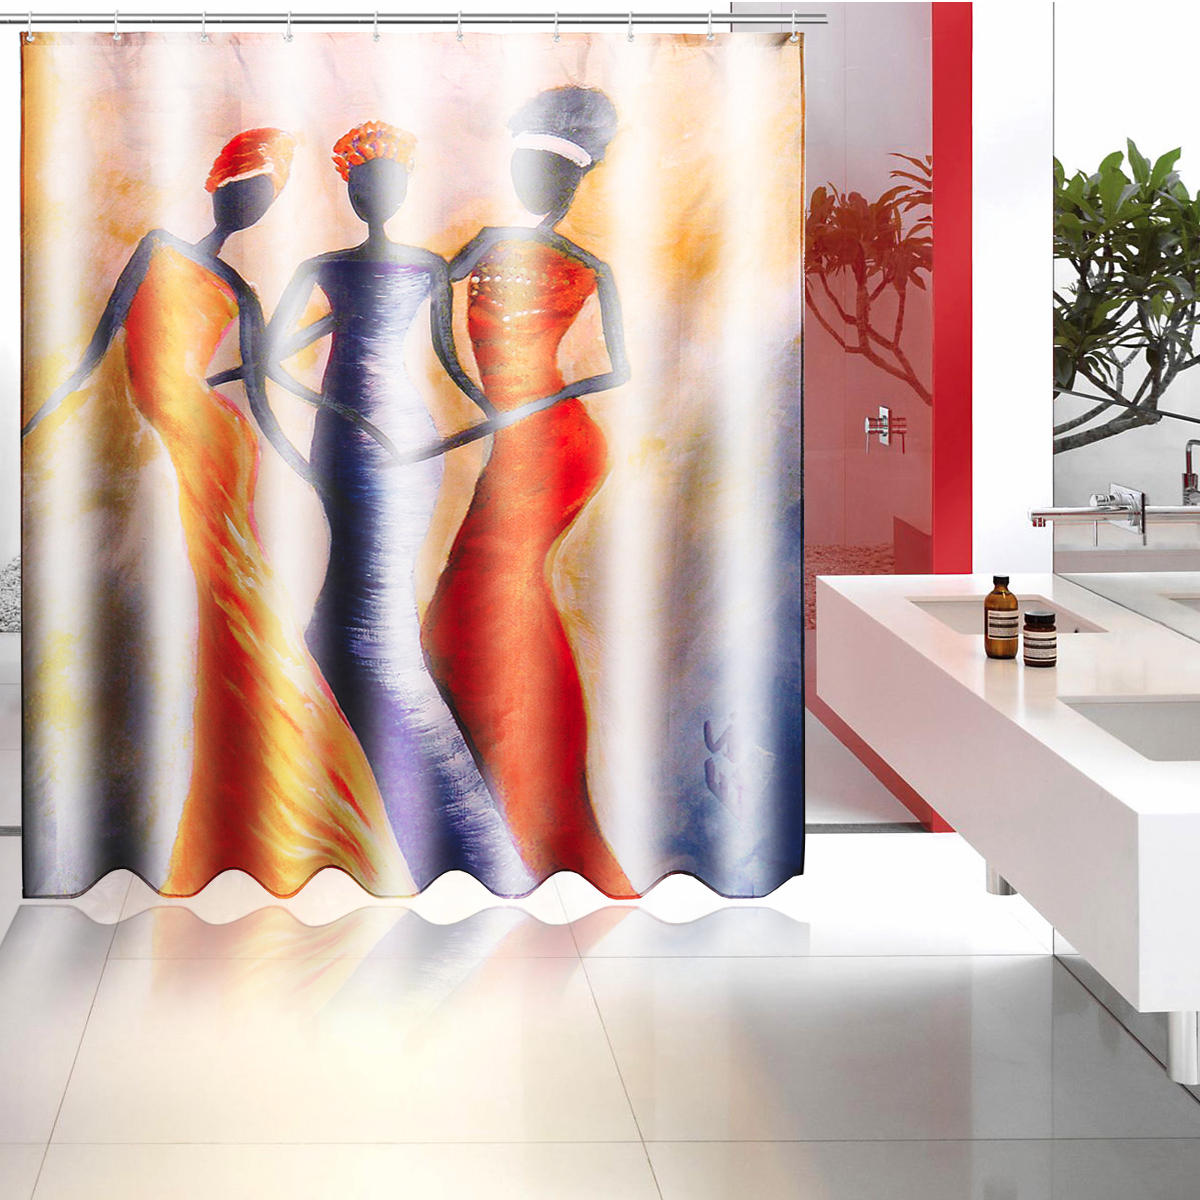 

150cm/180cm Polyester Waterproof Bathroom Hanging Bath Shower Curtains with 12 Hooks